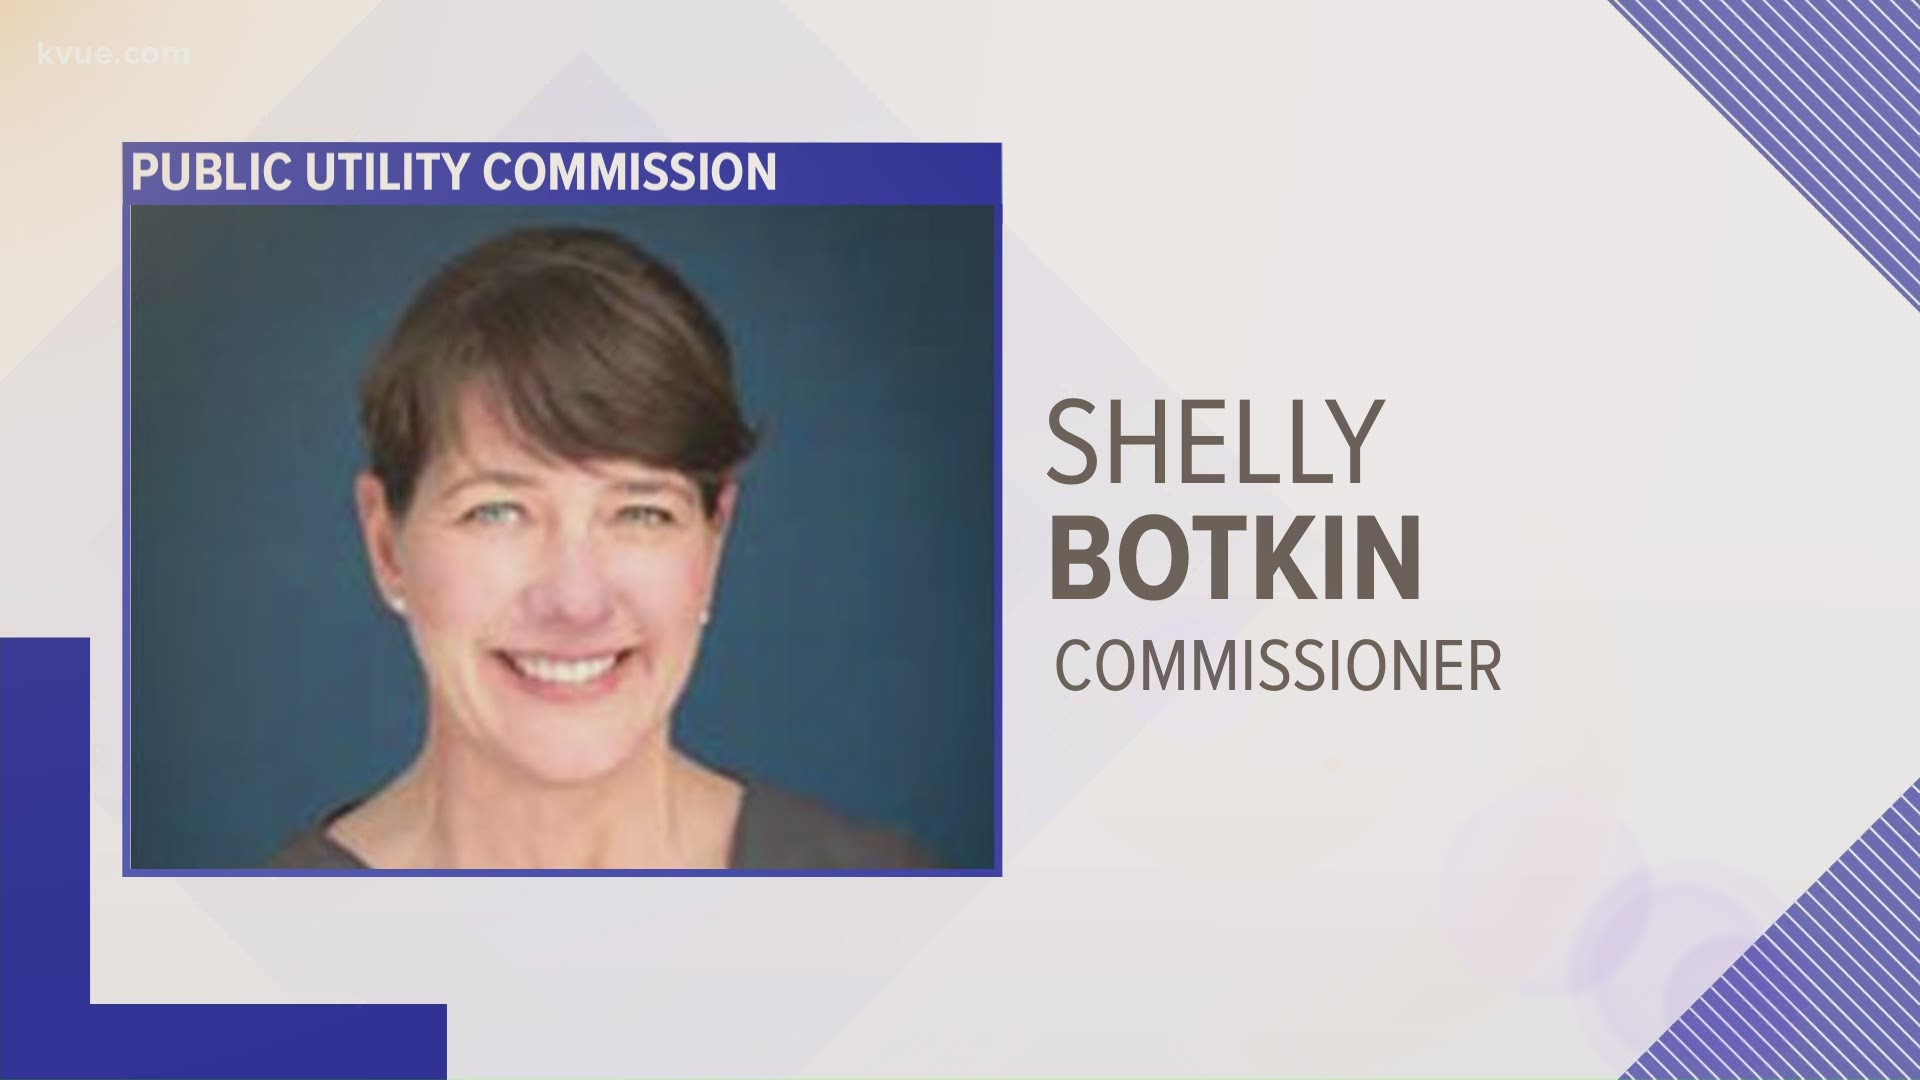 Commissioner Shelly Botkin with the Public Utility Commission of Texas resigned Monday.